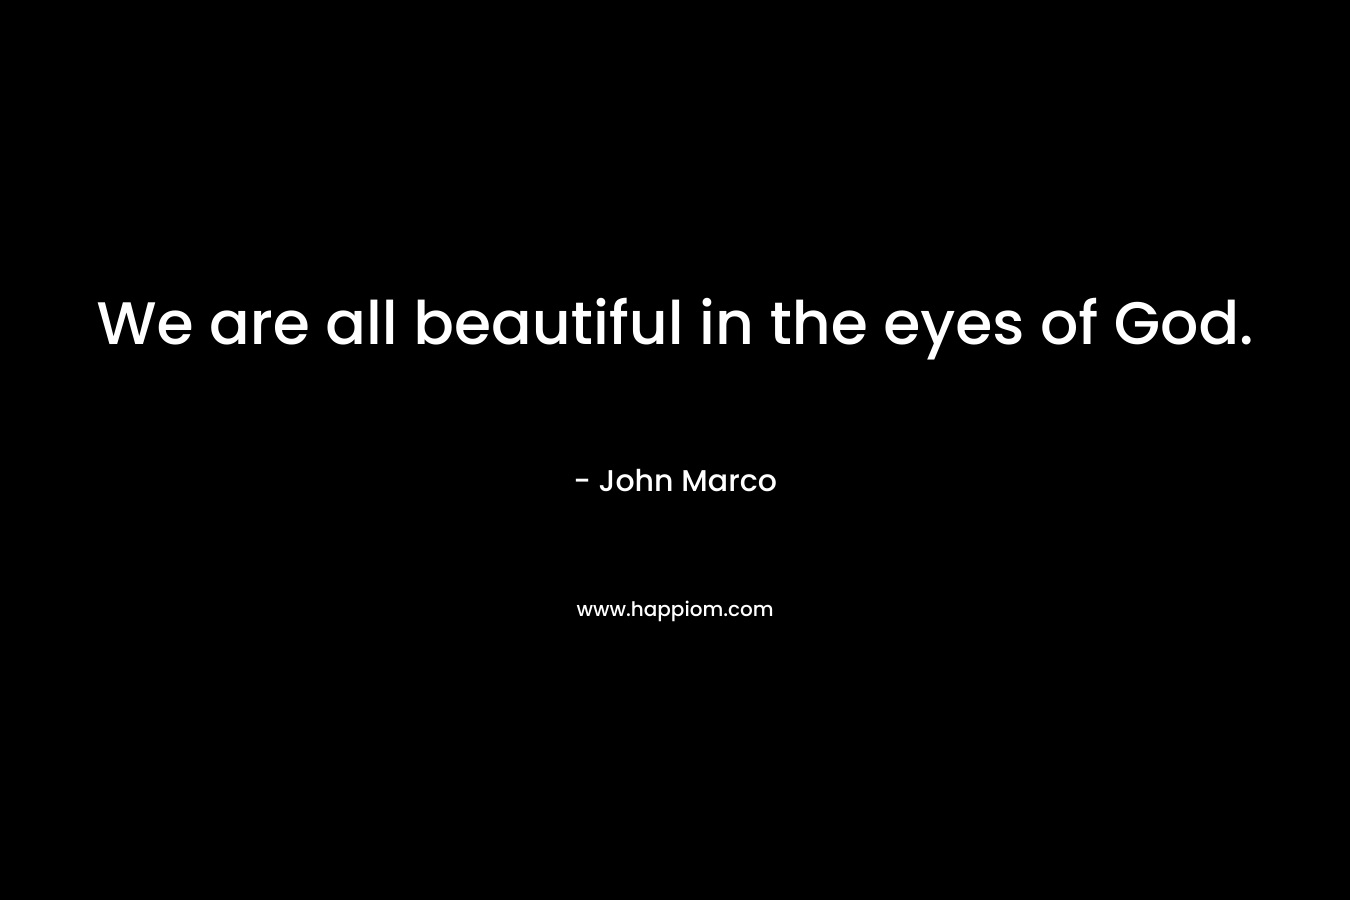 We are all beautiful in the eyes of God. – John Marco